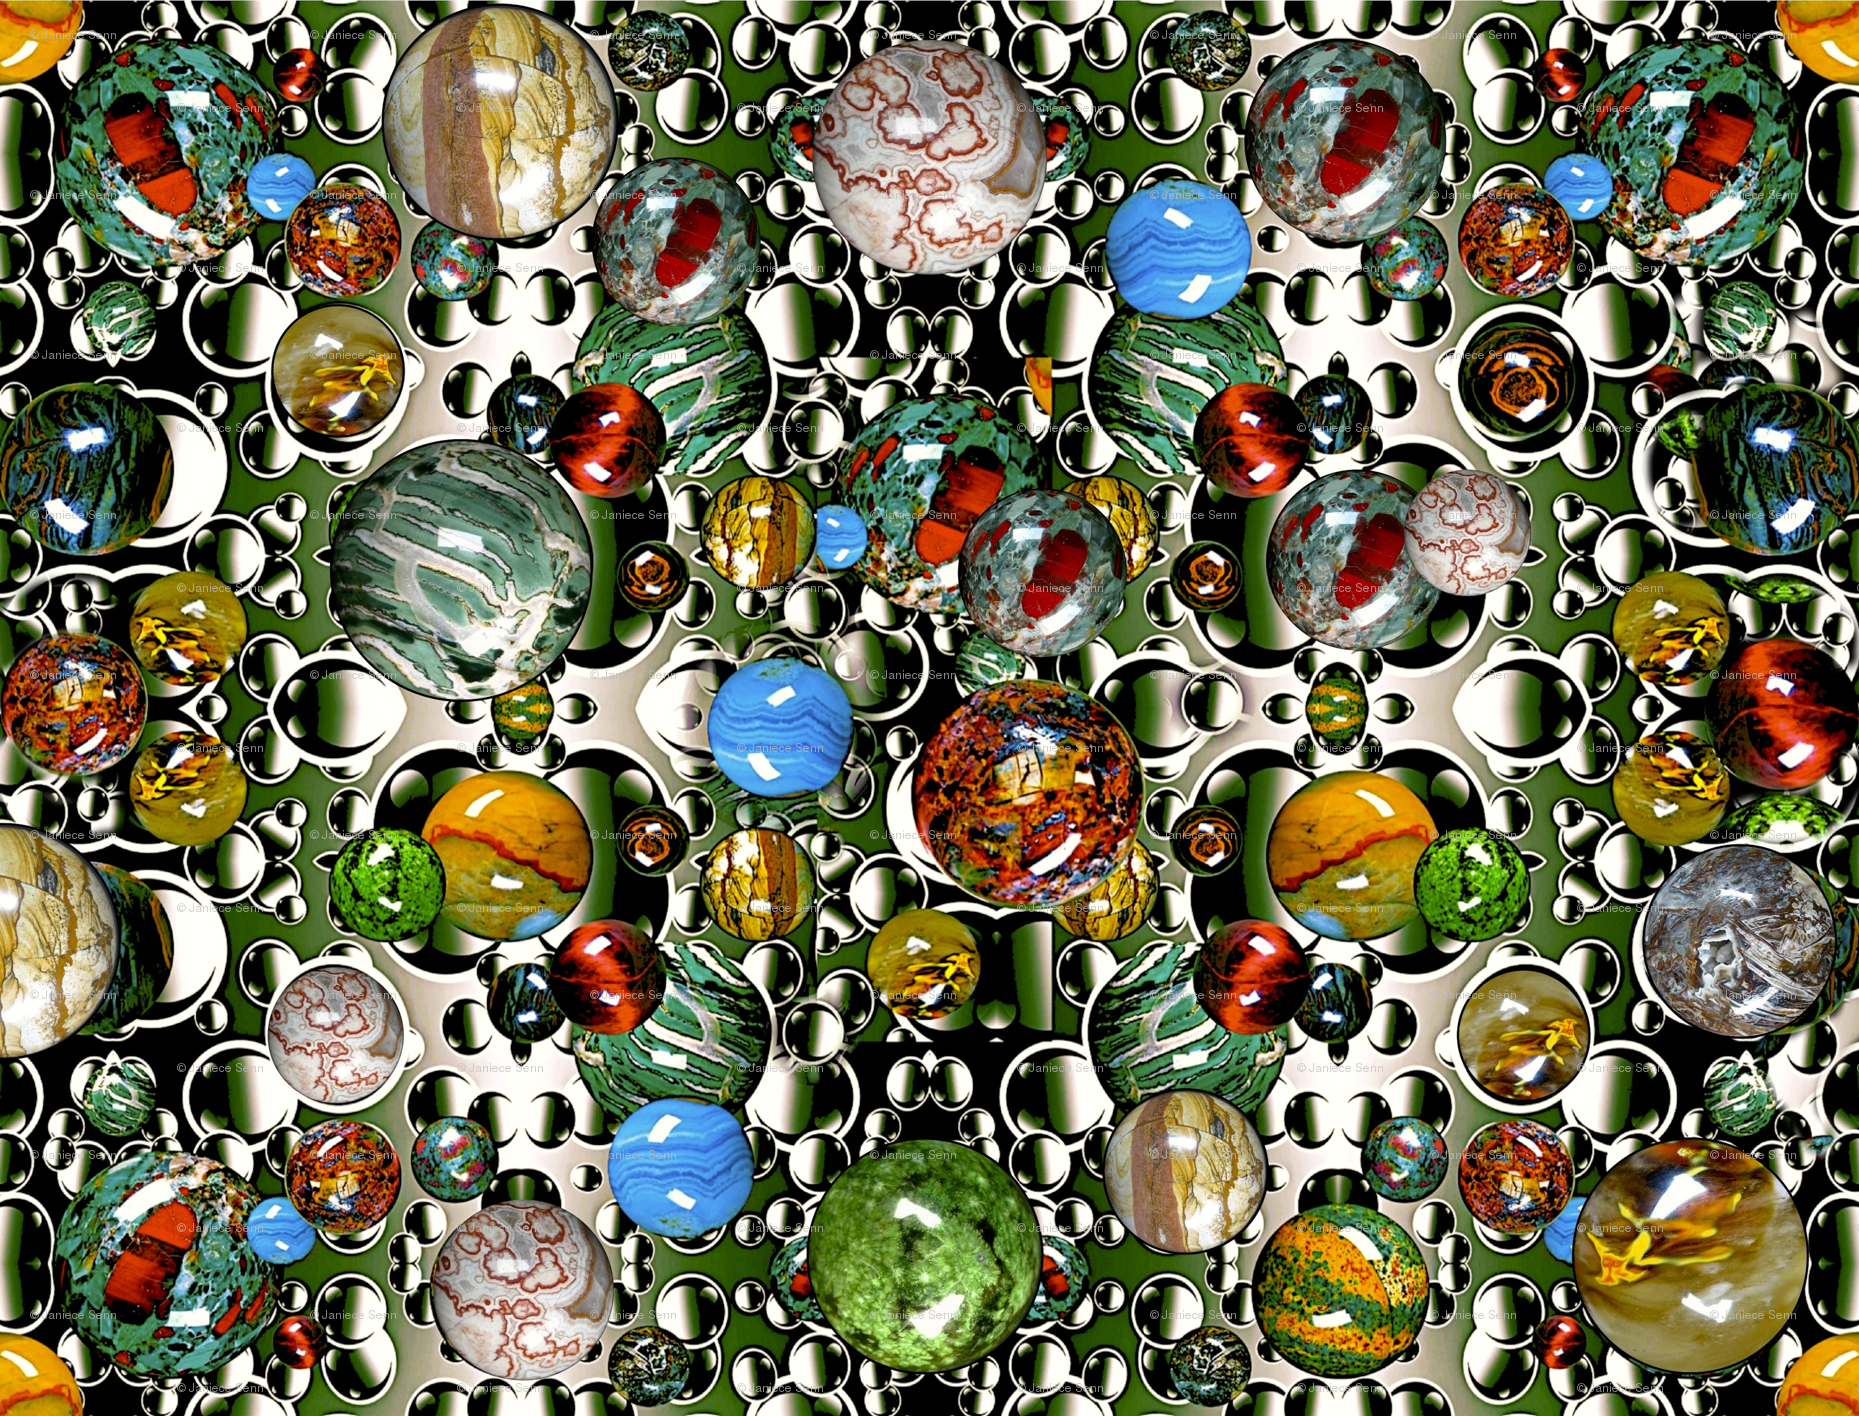 Lost My Marbles fabric - whimzwhirled - Spoonflower